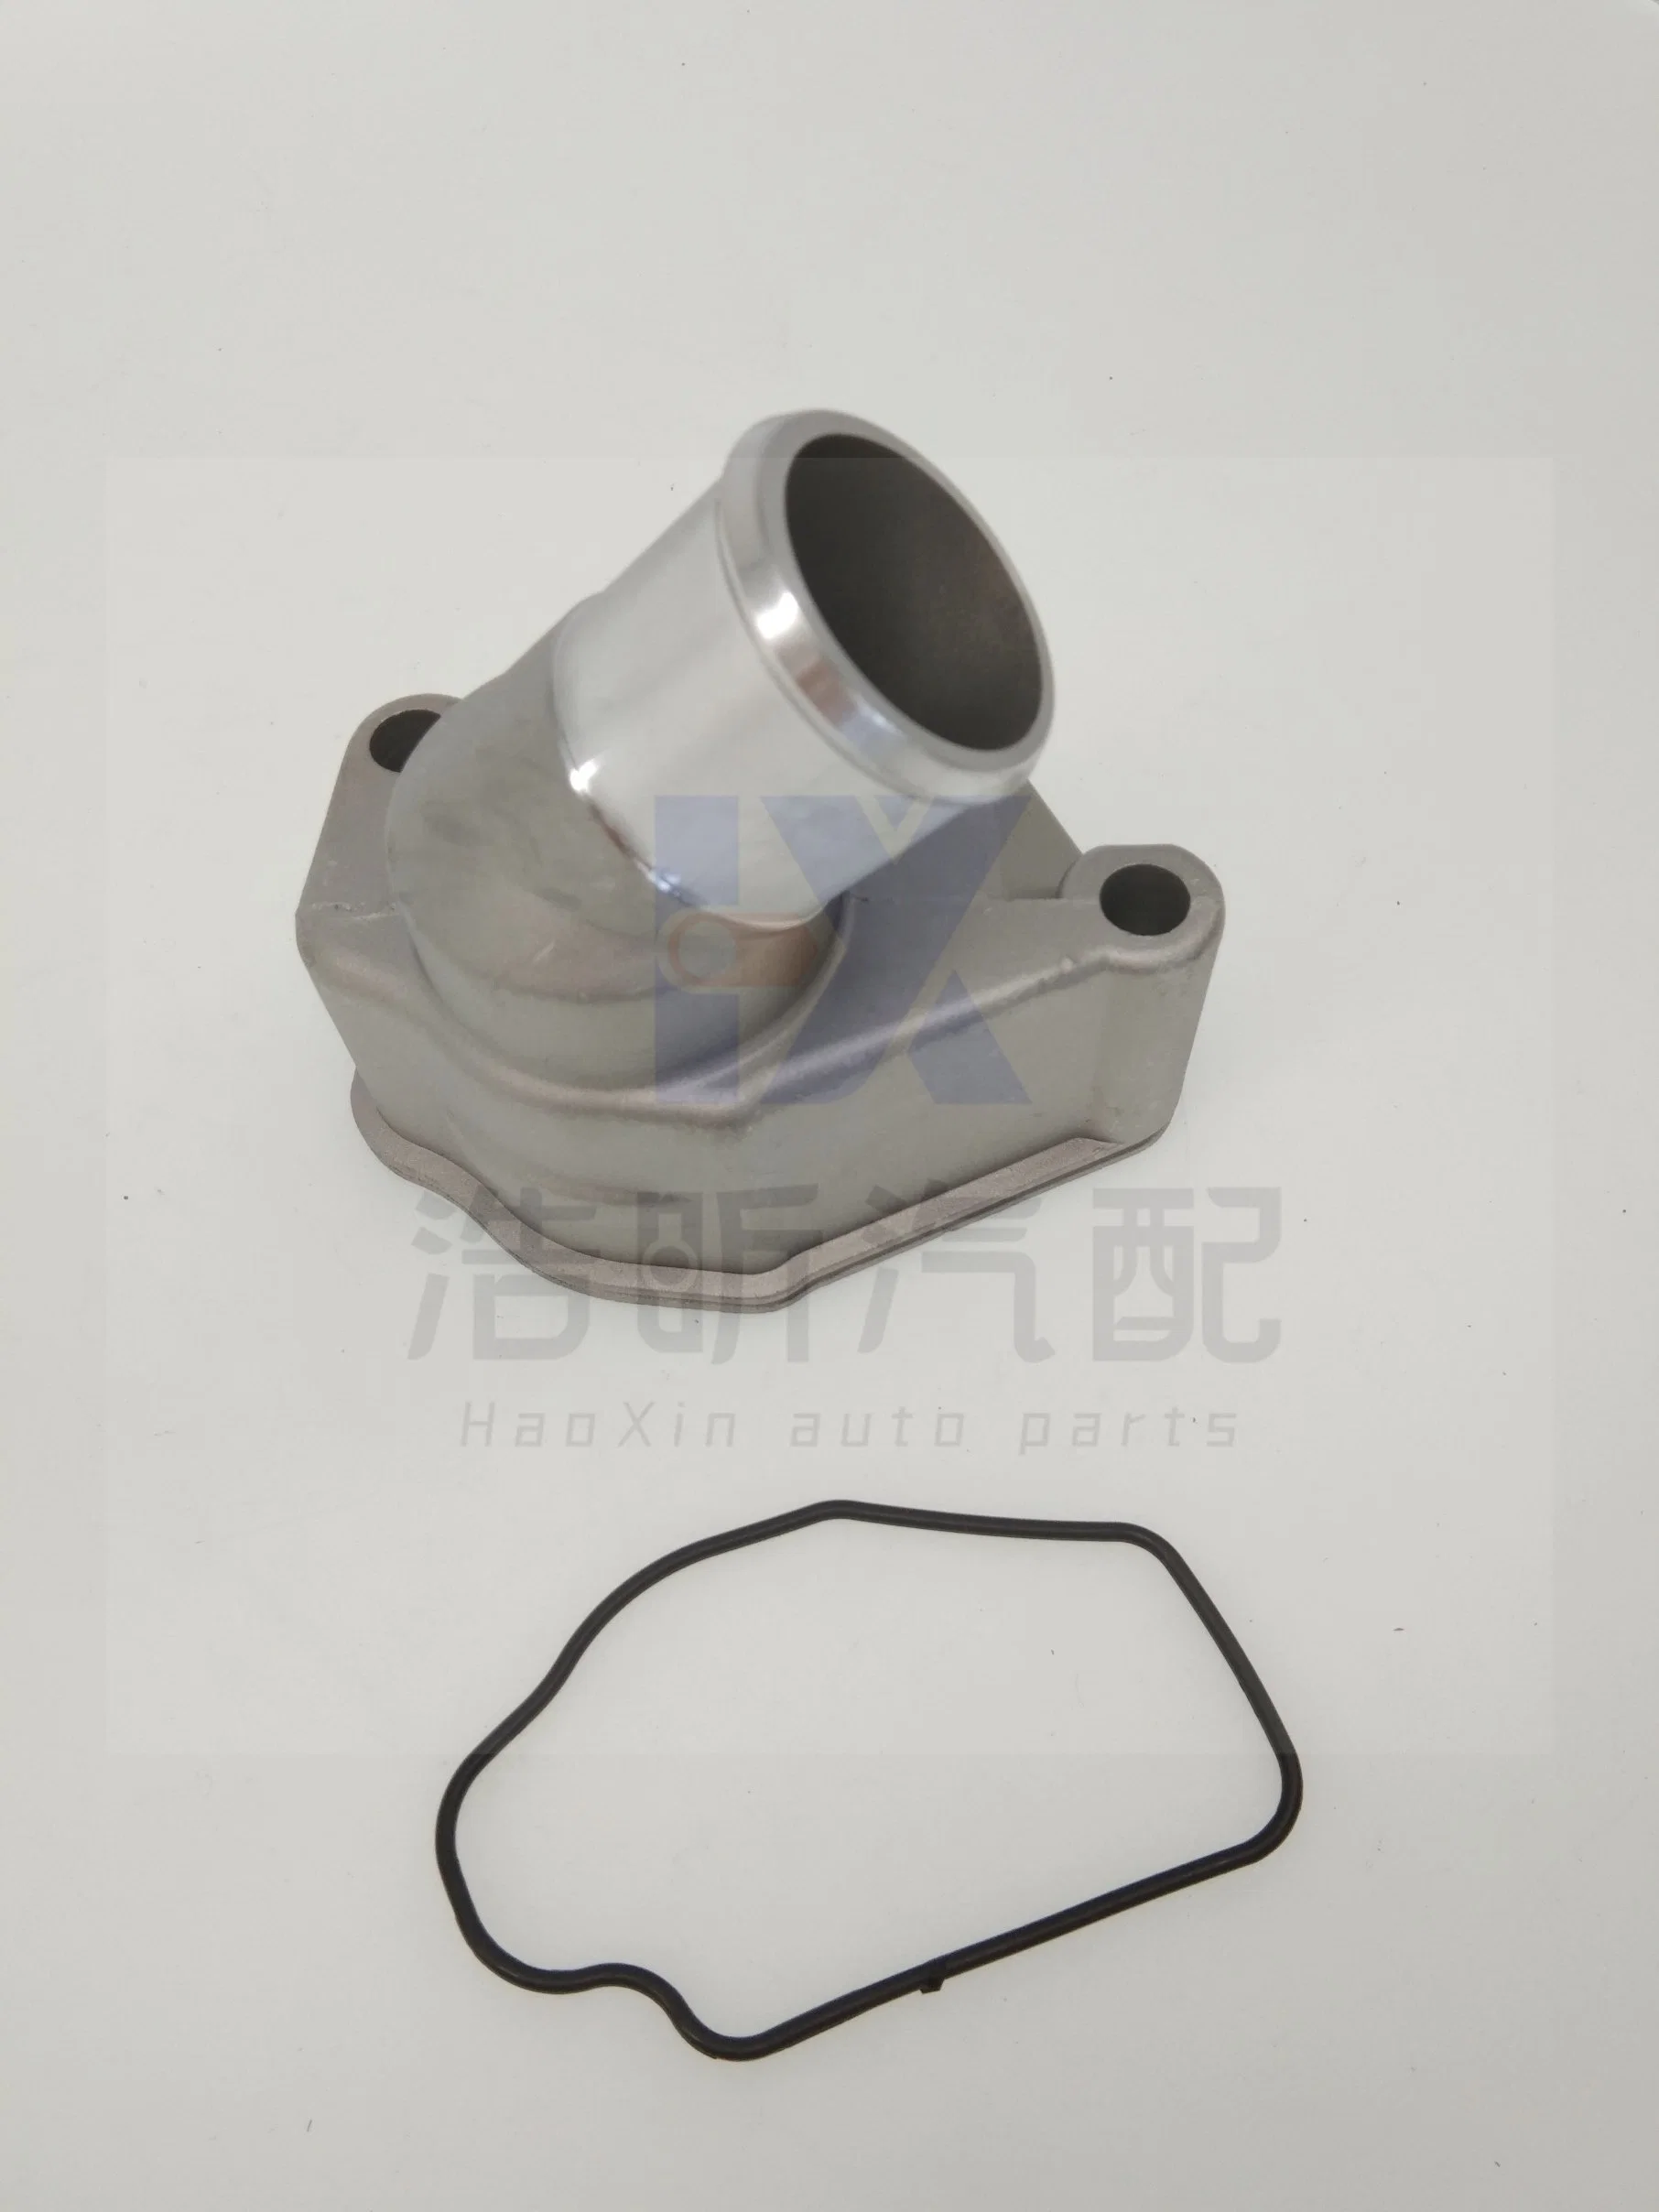 Factor Thermostat Housing for Chevrolet Lacetti Optra Captiva 2.4L Epica 2.0L Buick Excelle 1.8L 92062728 90501081 90411948 1338079 01338079